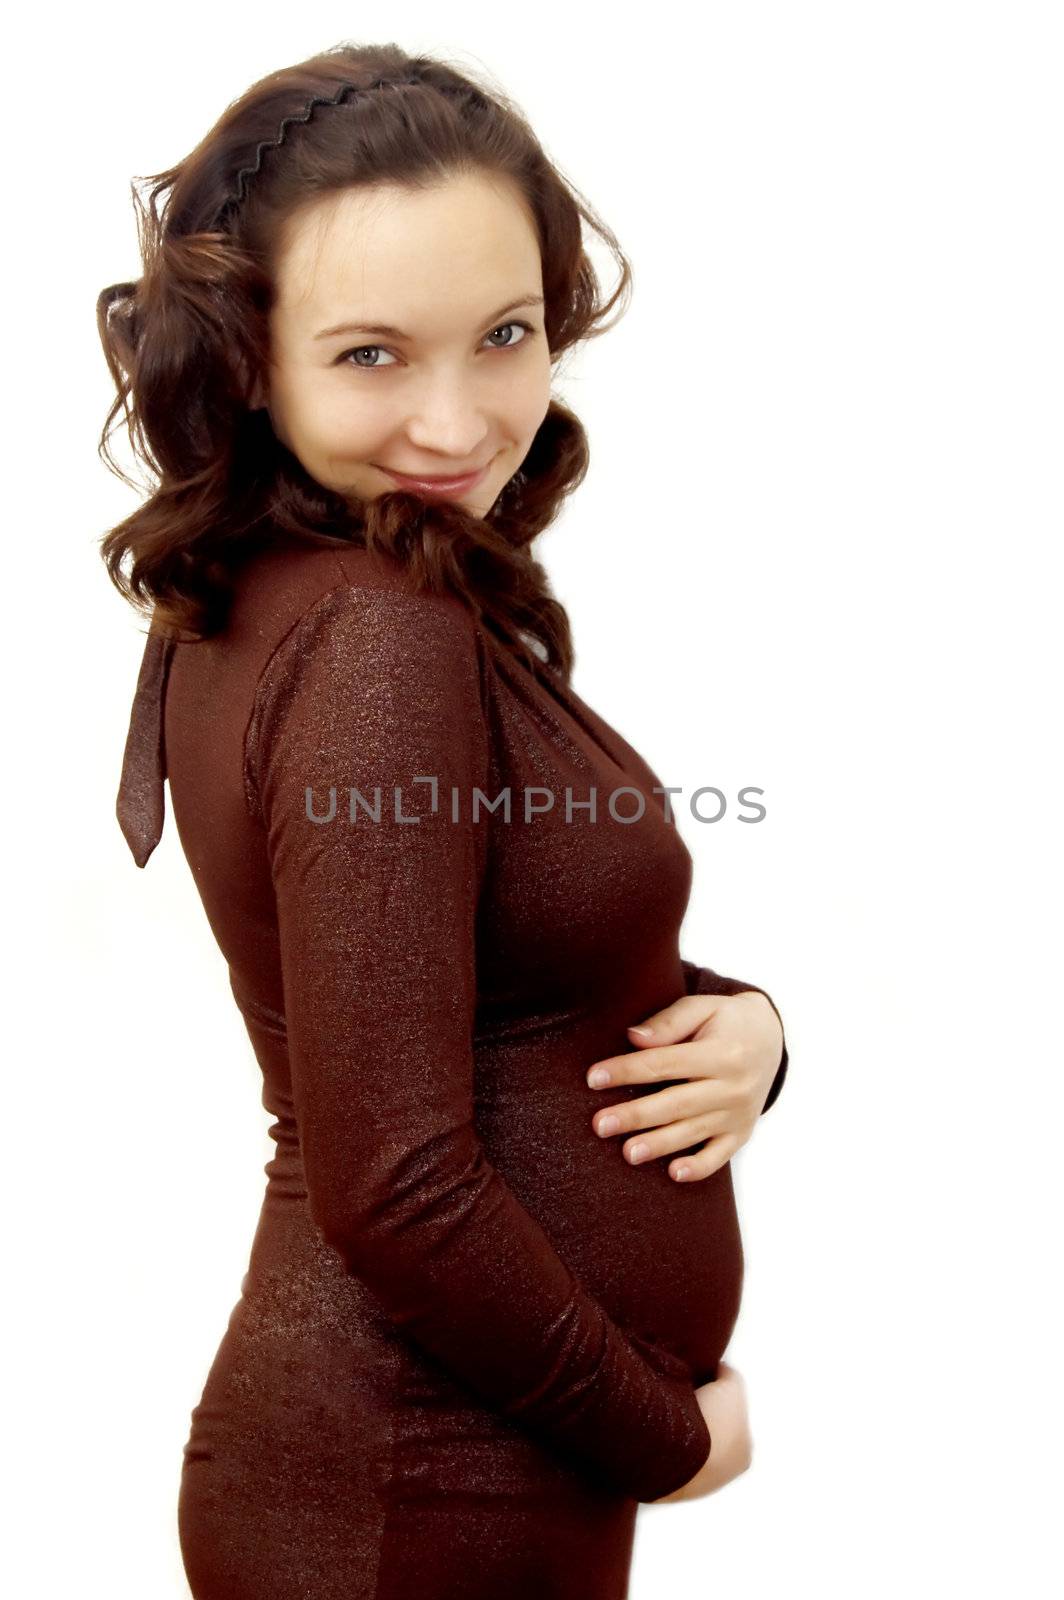 Smiling pregnant woman by Angel_a